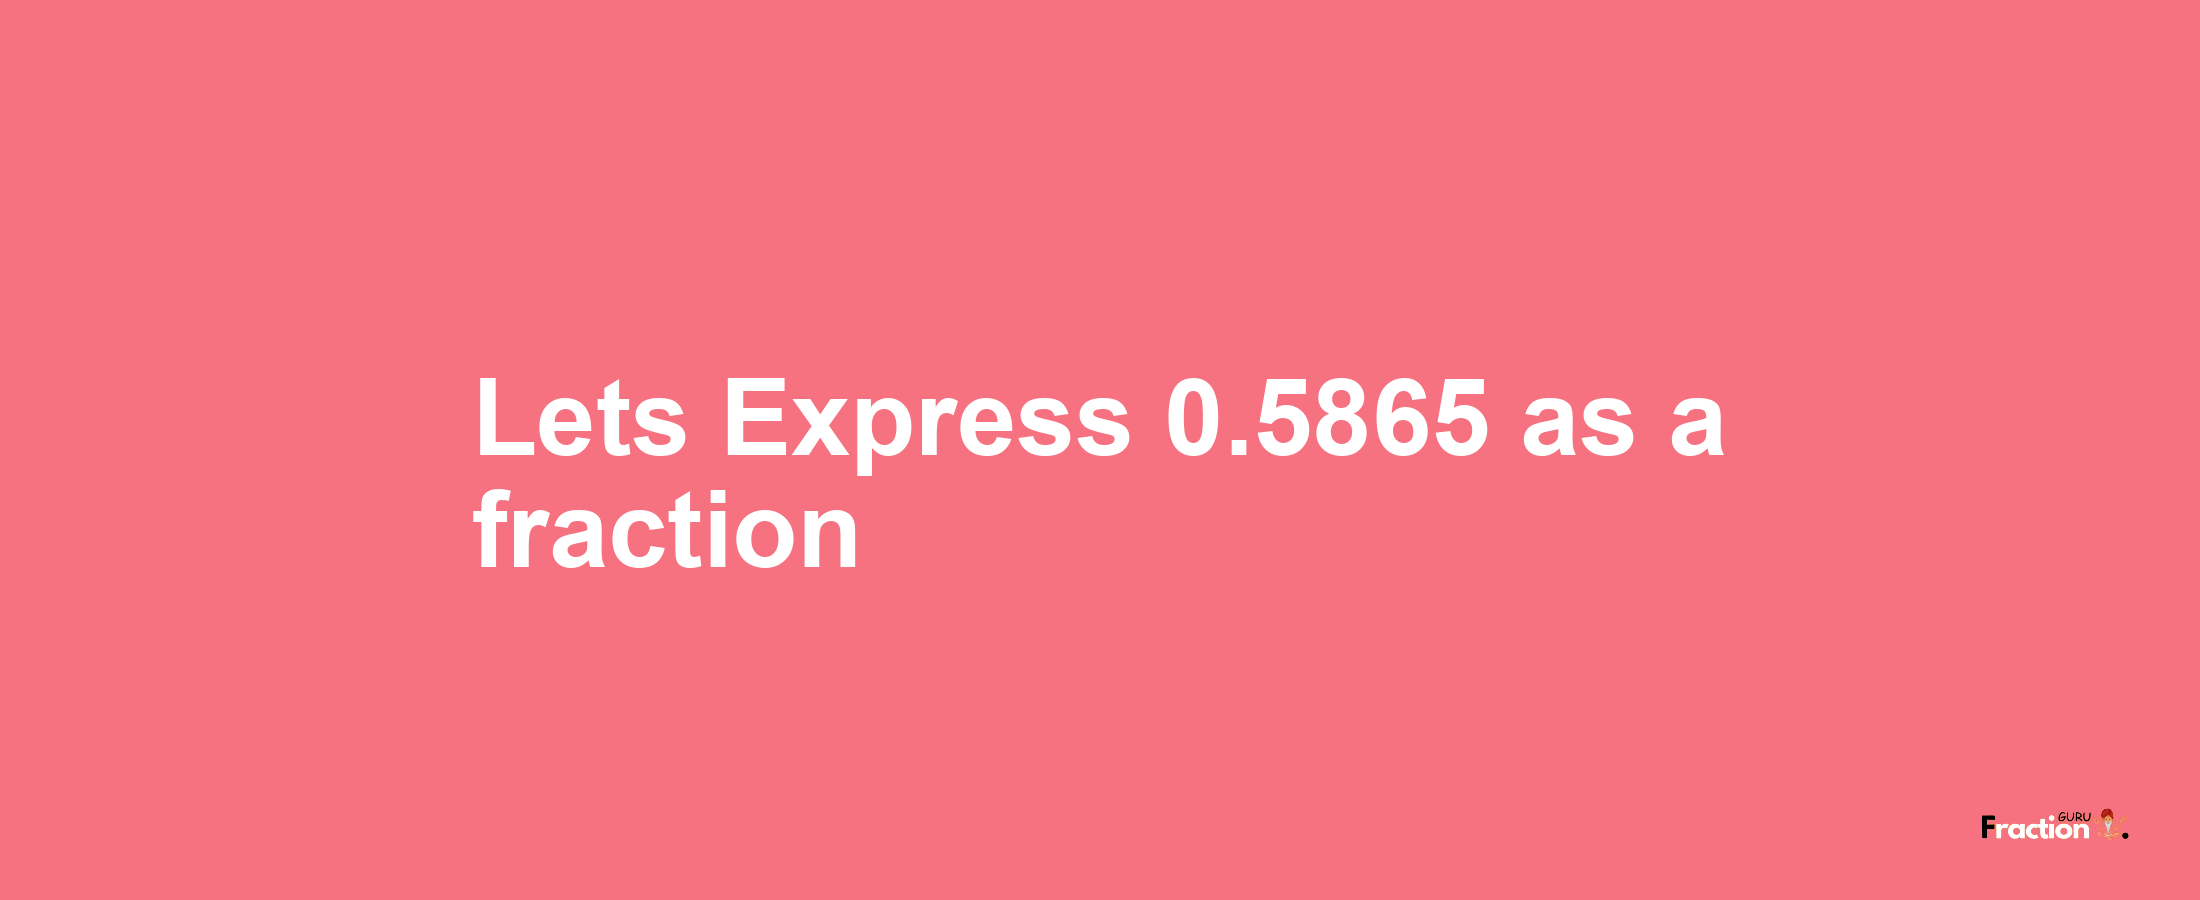 Lets Express 0.5865 as afraction